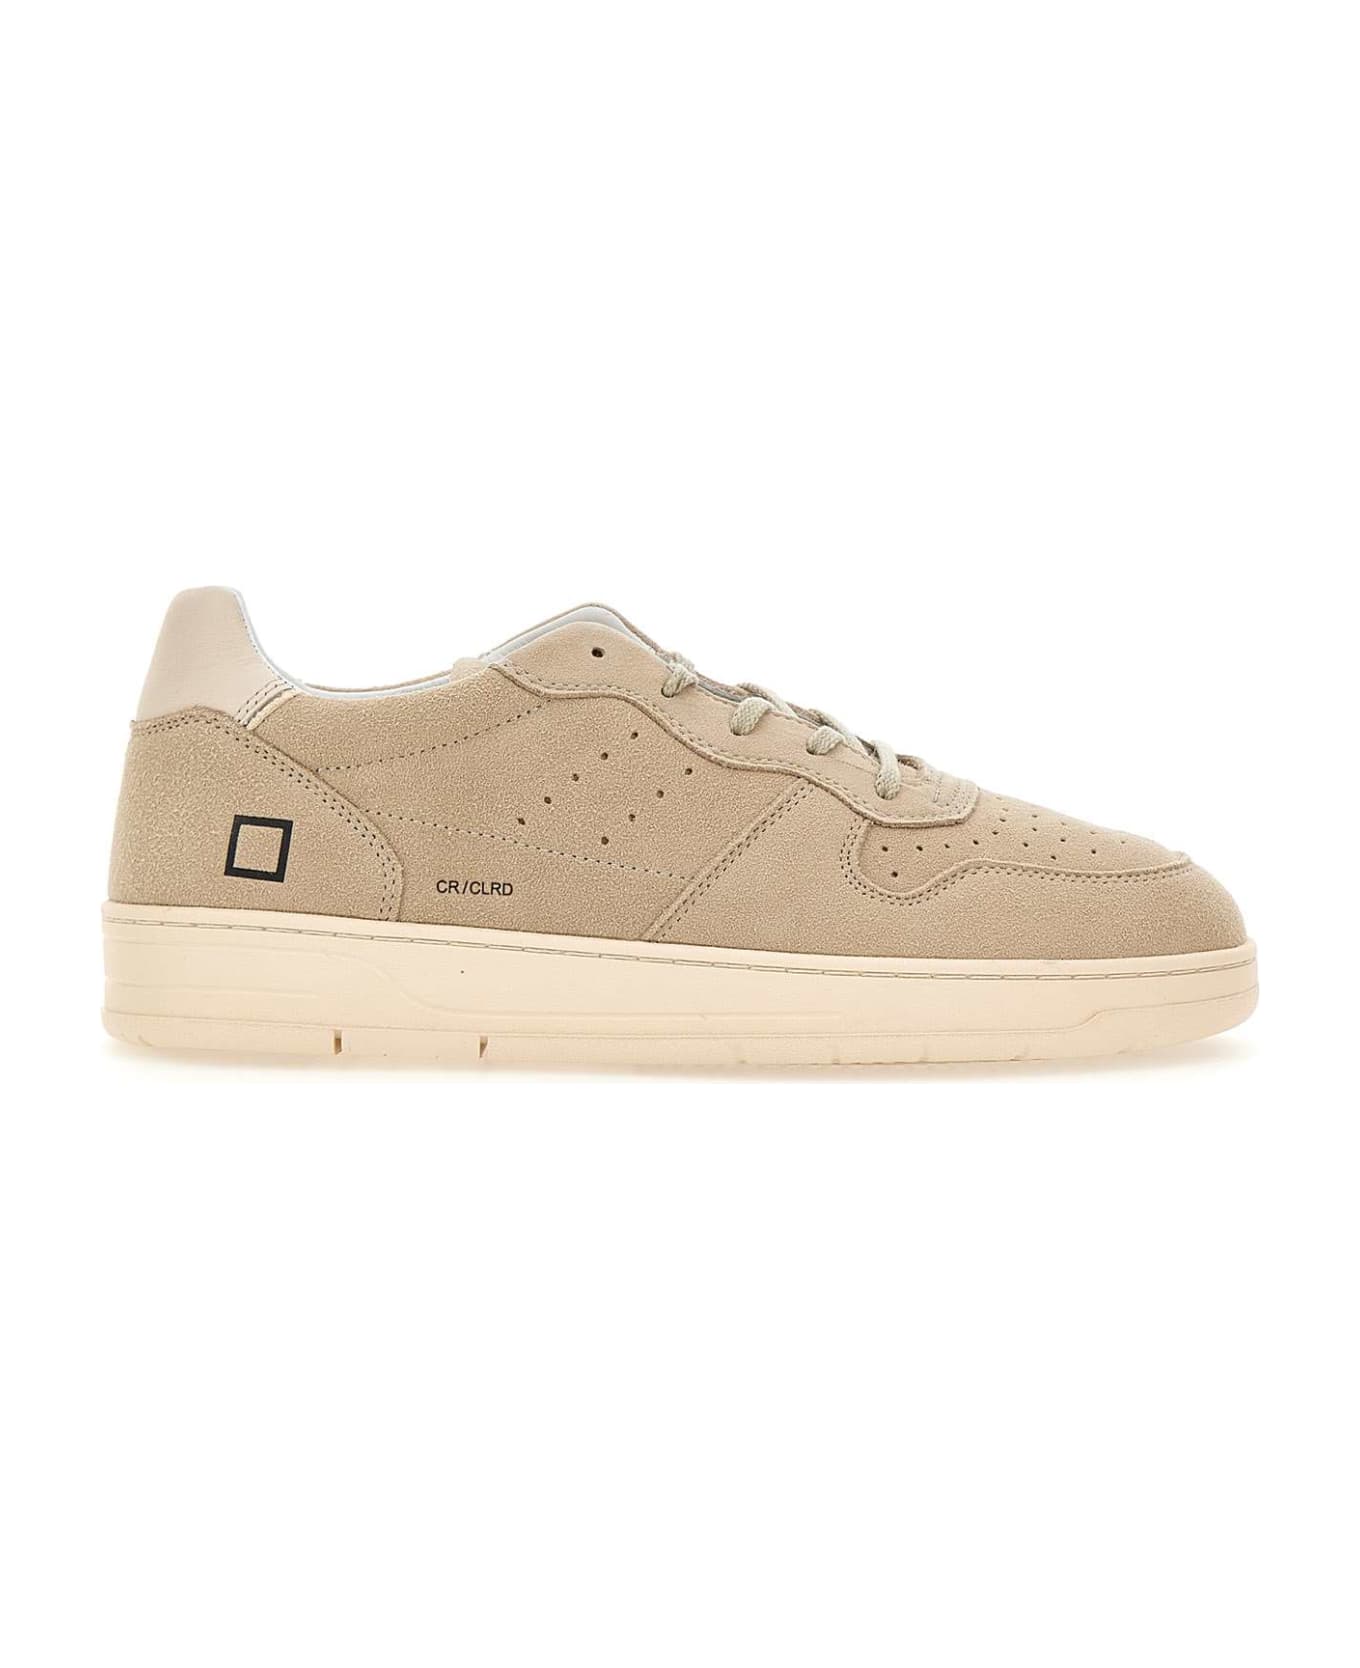 D.A.T.E. "court 2.0 Colored" Suede Sneakers - BEIGE